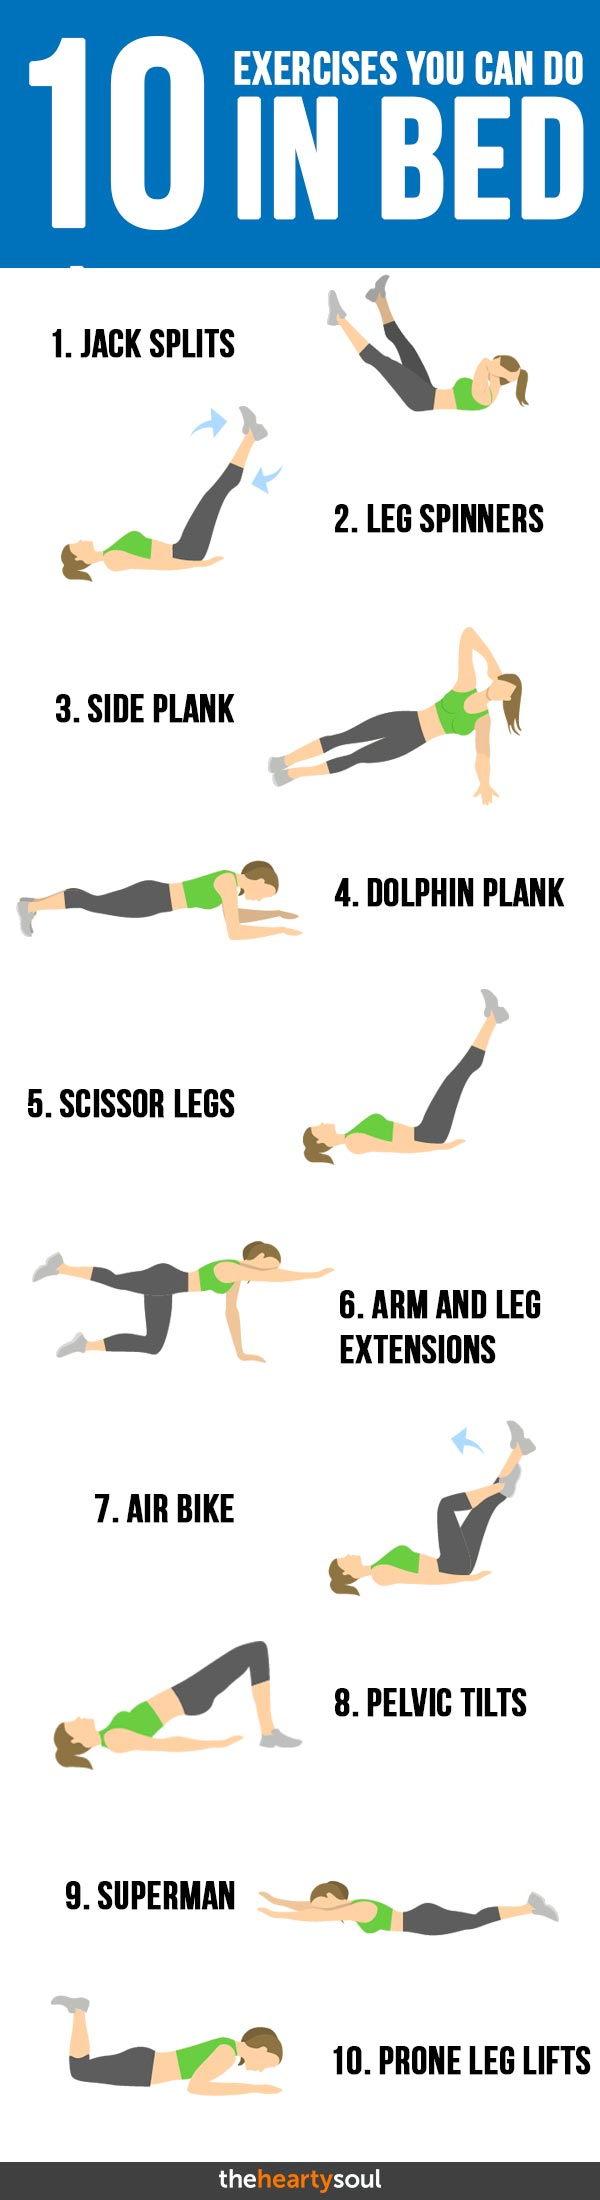 HOW TO FLATTEN YOUR STOMACH (5 Tummy Toning Exercises)